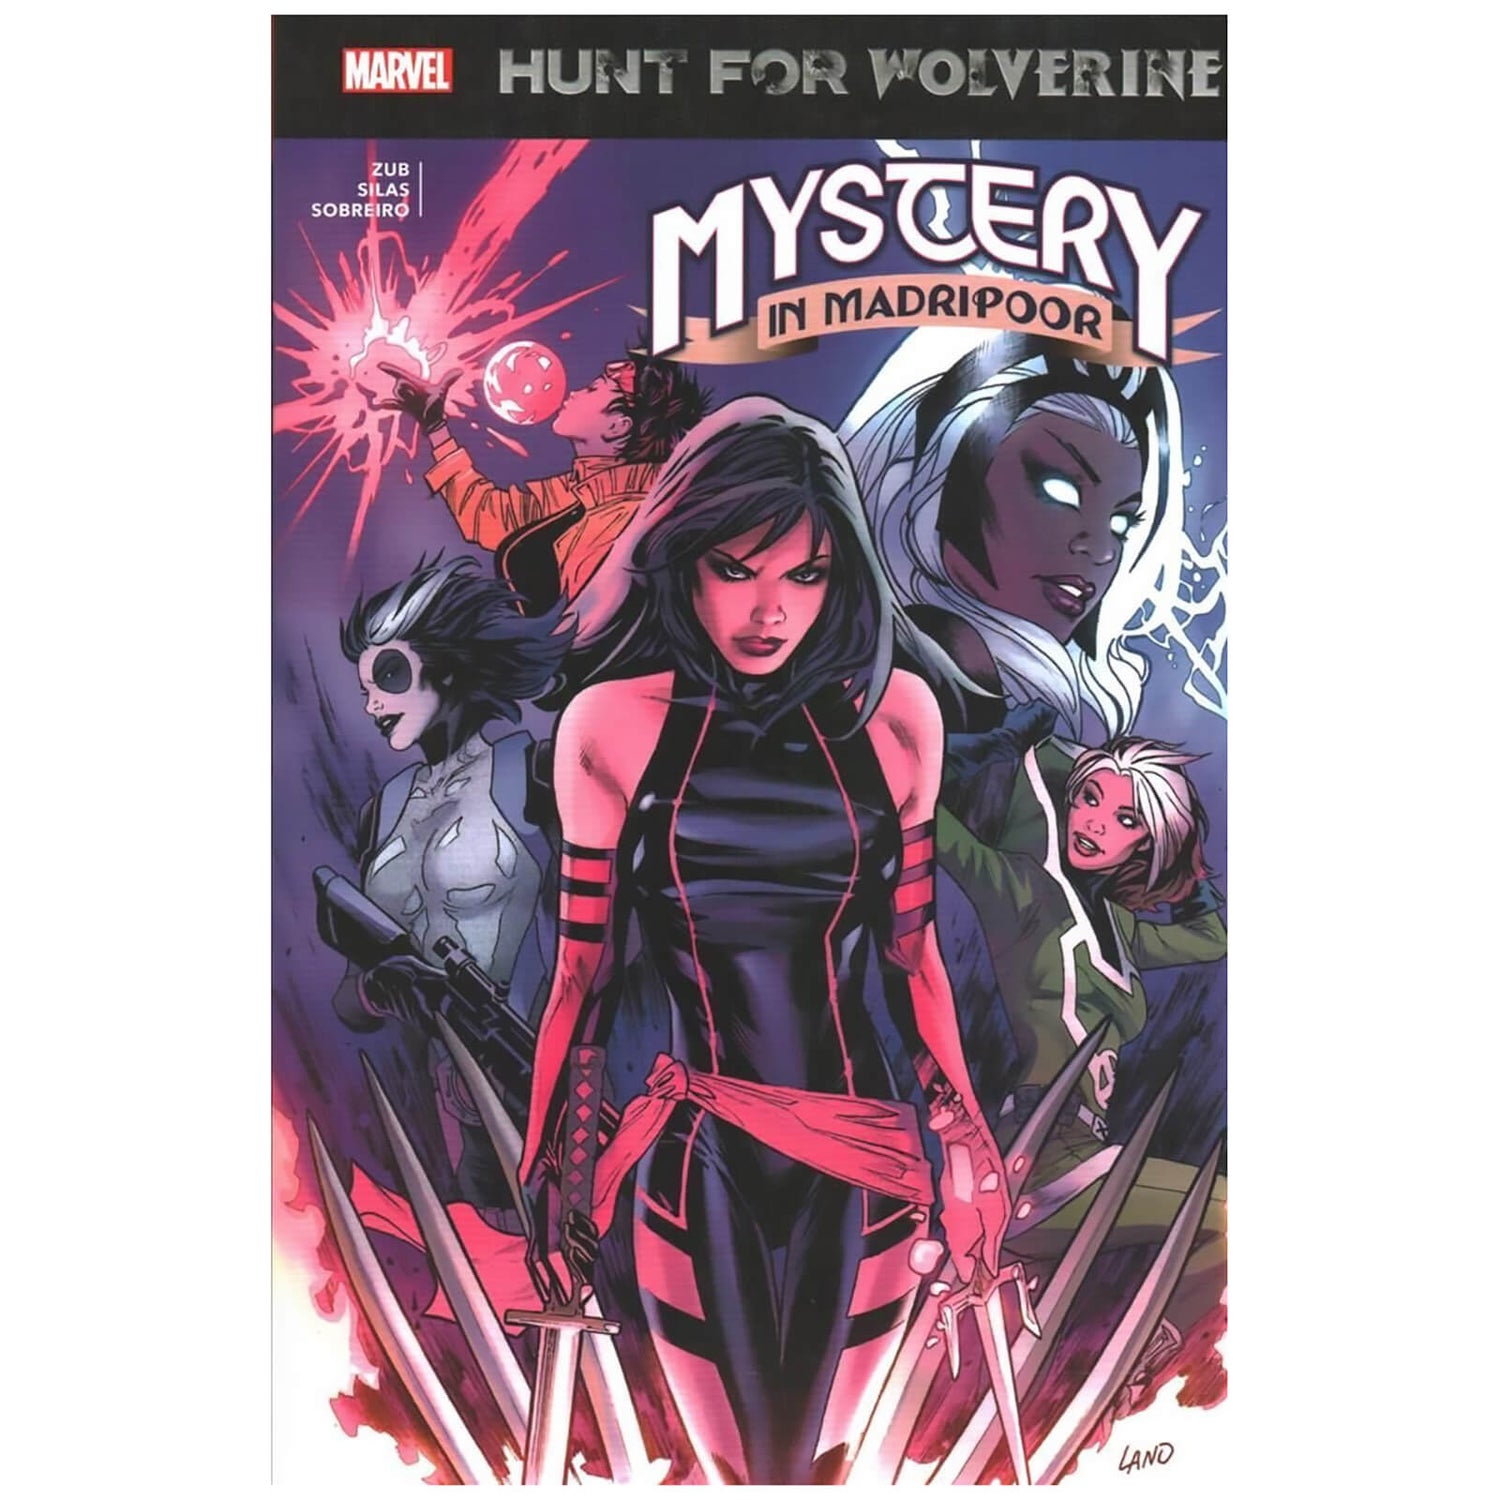 Marvel Comics Hunt For Wolverine Trade Paperback Mystery In Madripoor Graphic Novel